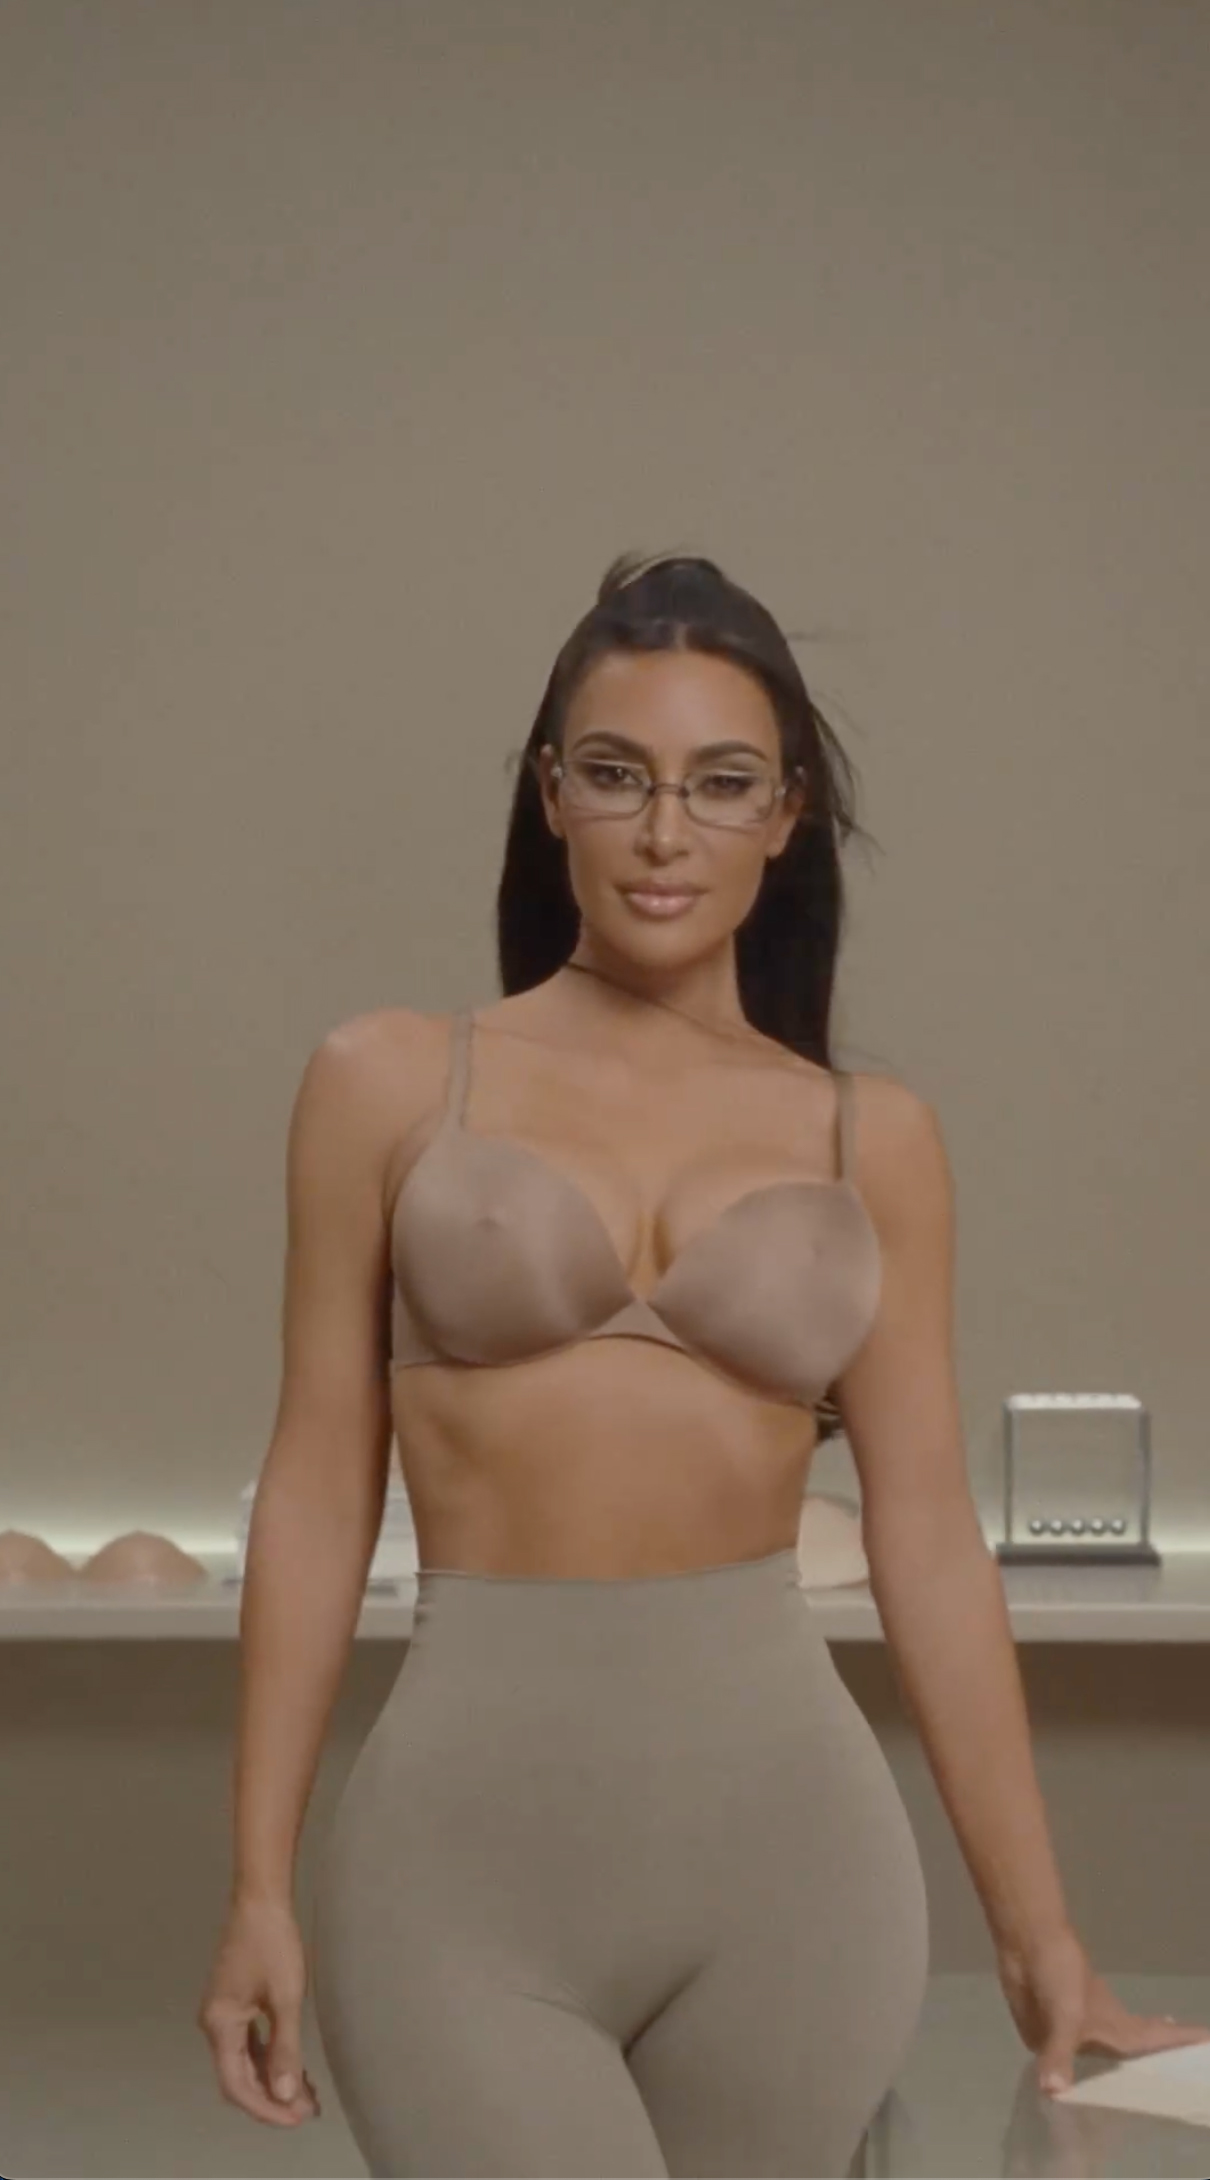 Kim also sparked conversation with the release of the Skims nipple bra